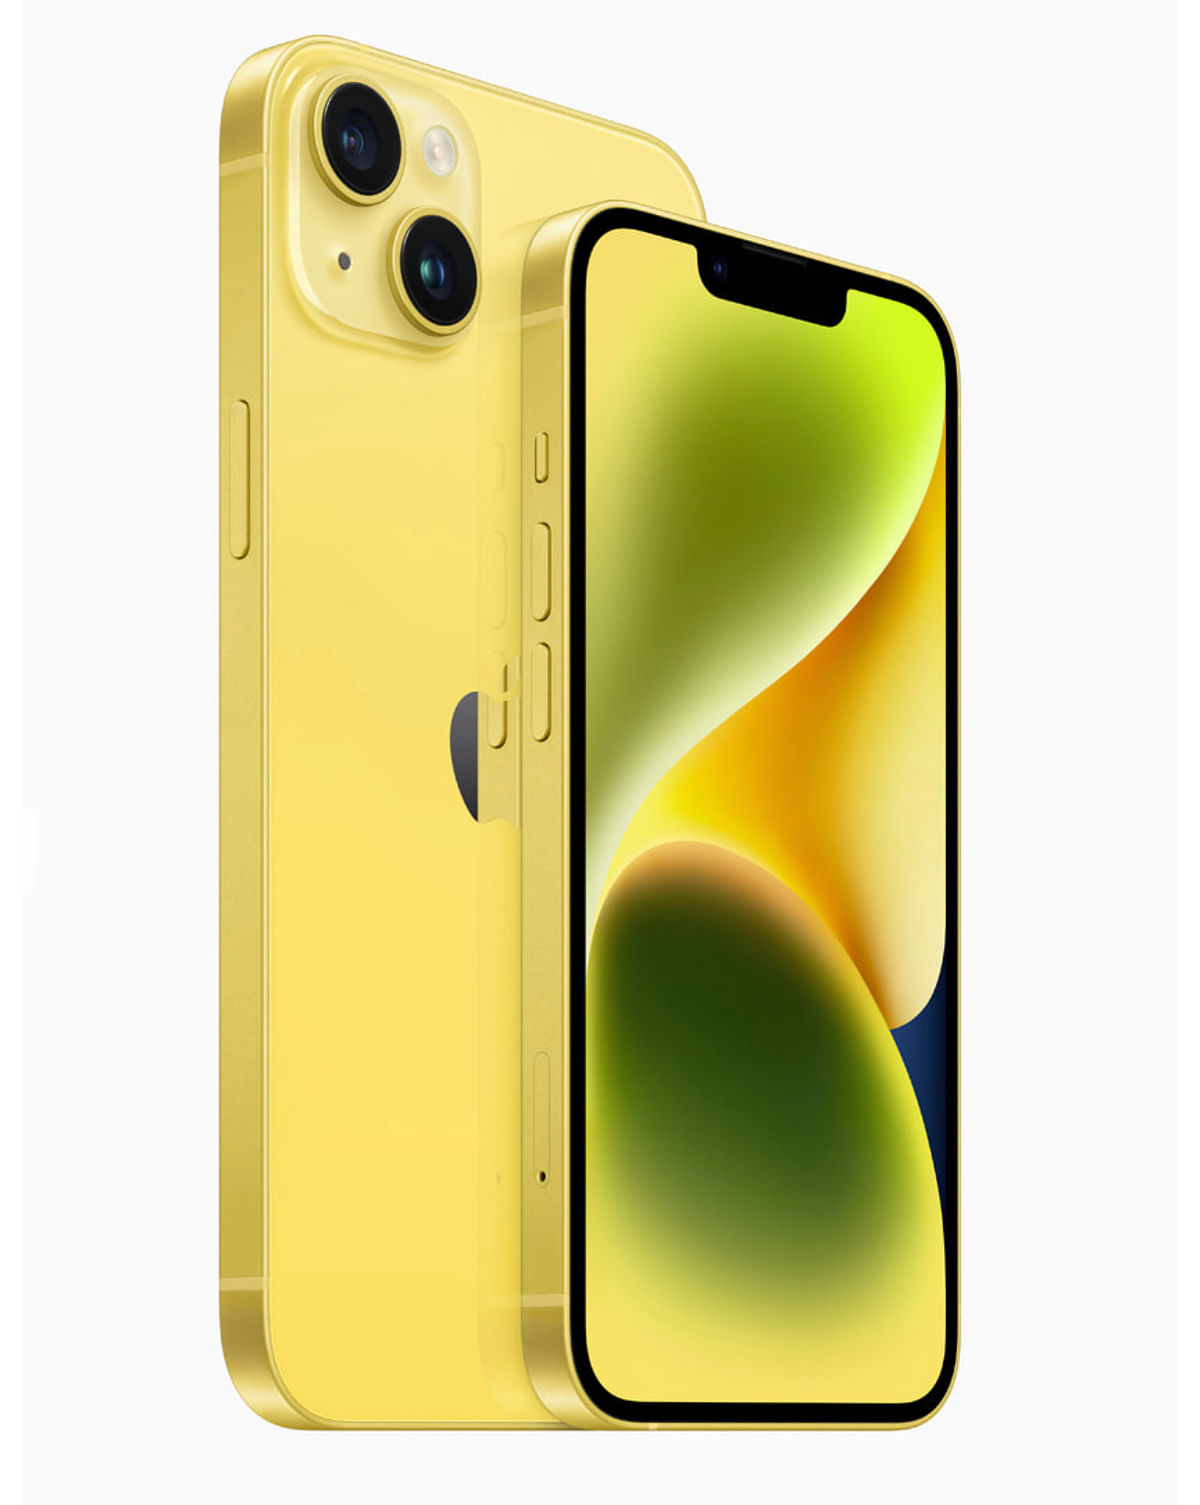 iPhone 14 in new yellow colour. Credit: Apple